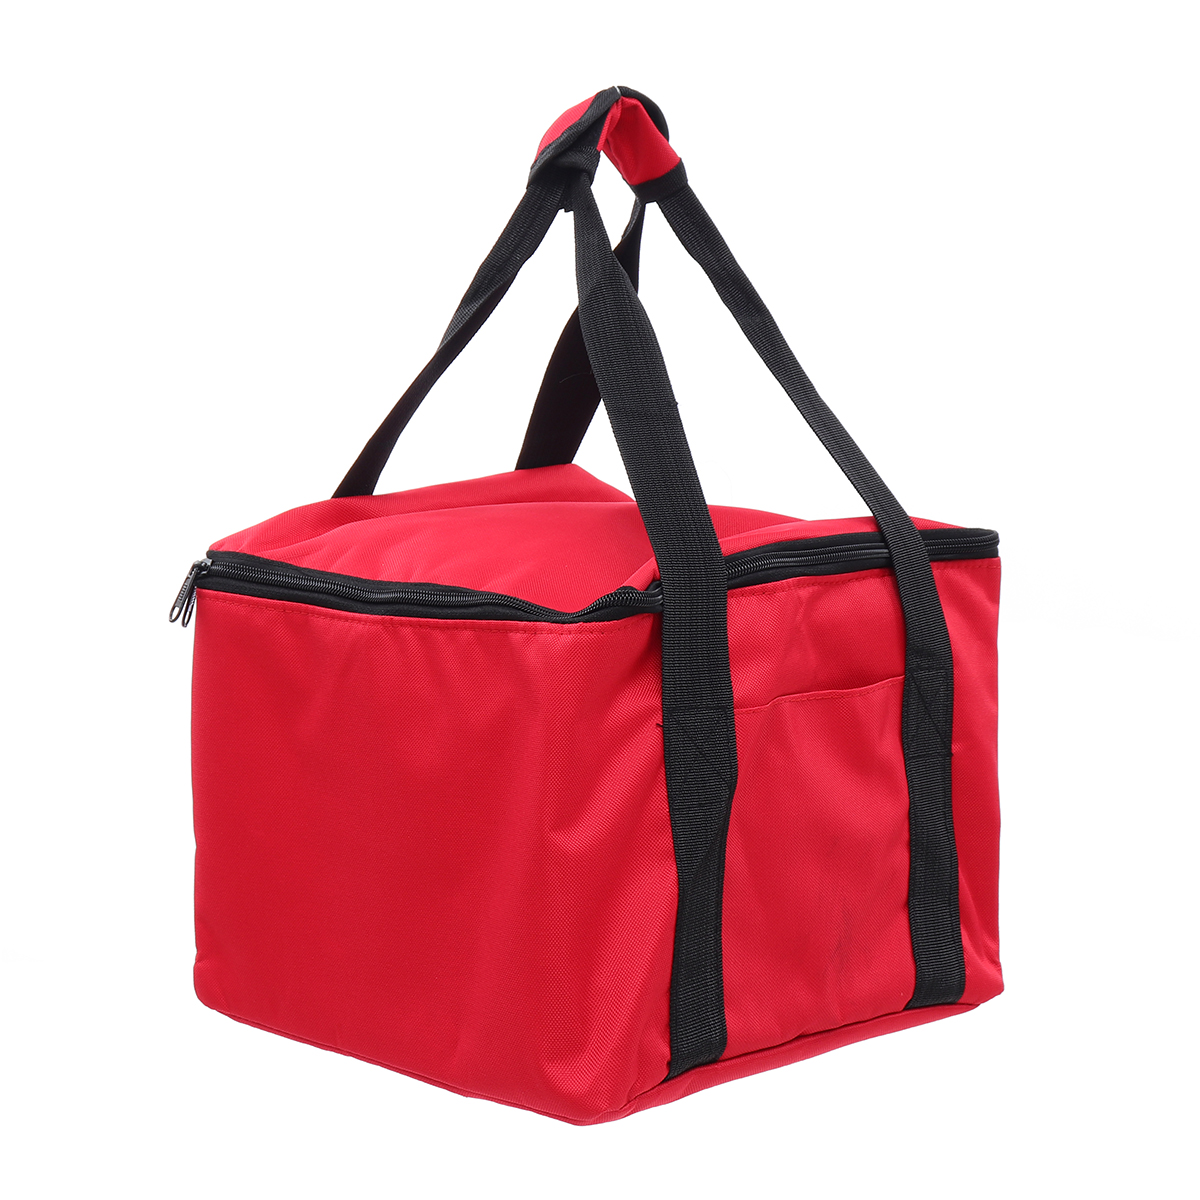 19L Food Delivery Insulated Lunch Bag Waterproof Oxford Cloth Portable Drivers Large Outdoor